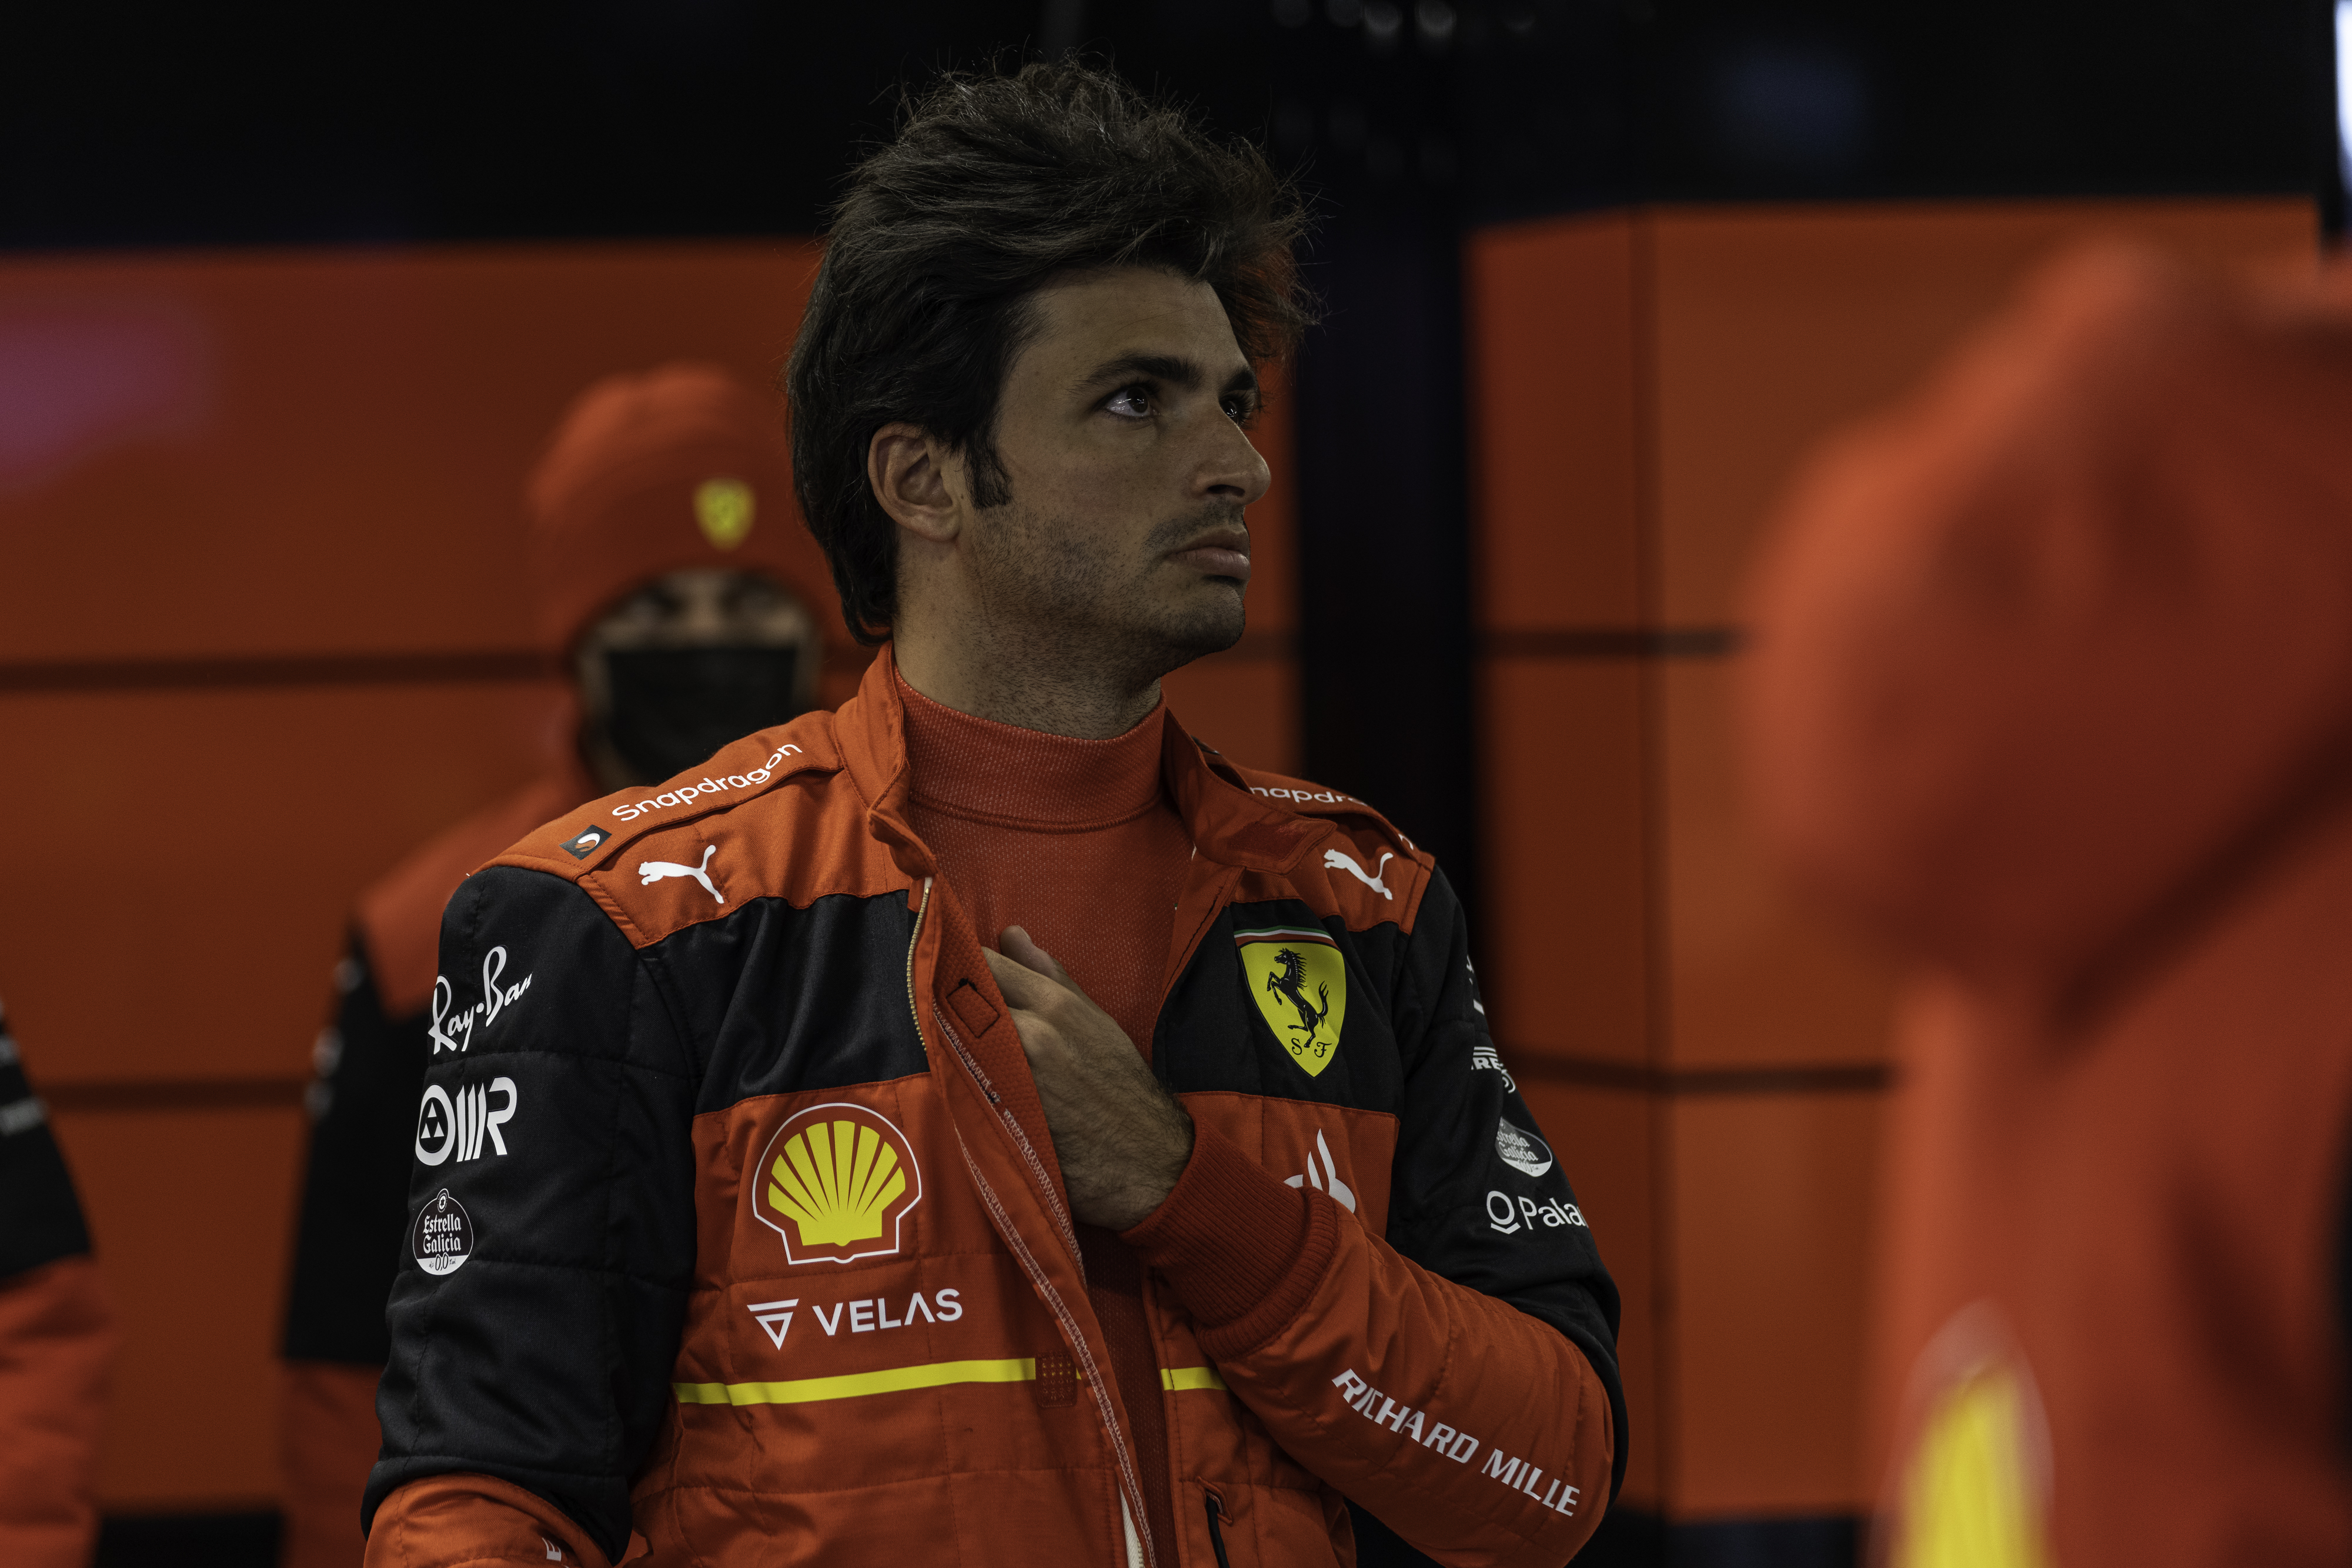 Carlos Sainz assessment after FP1 & FP2: "Didn't extract the maximum from  soft tyres" | 2022 Bahrain GP